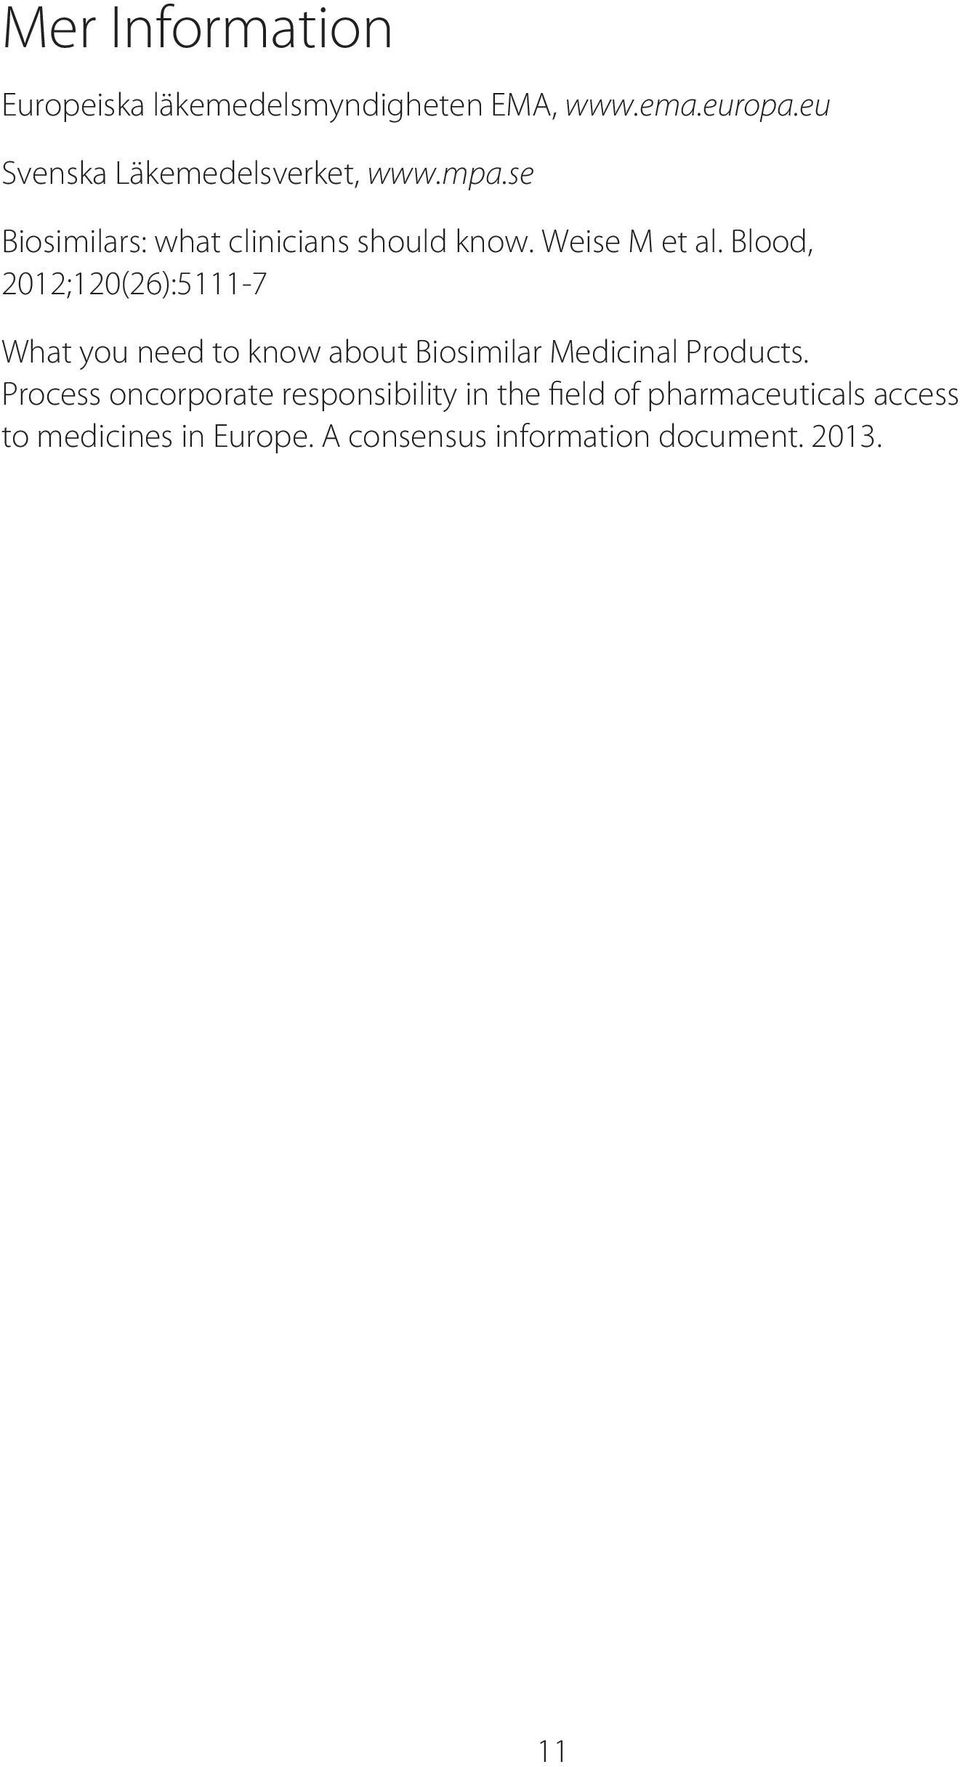 Blood, 2012;120(26):5111-7 What you need to know about Biosimilar Medicinal Products.